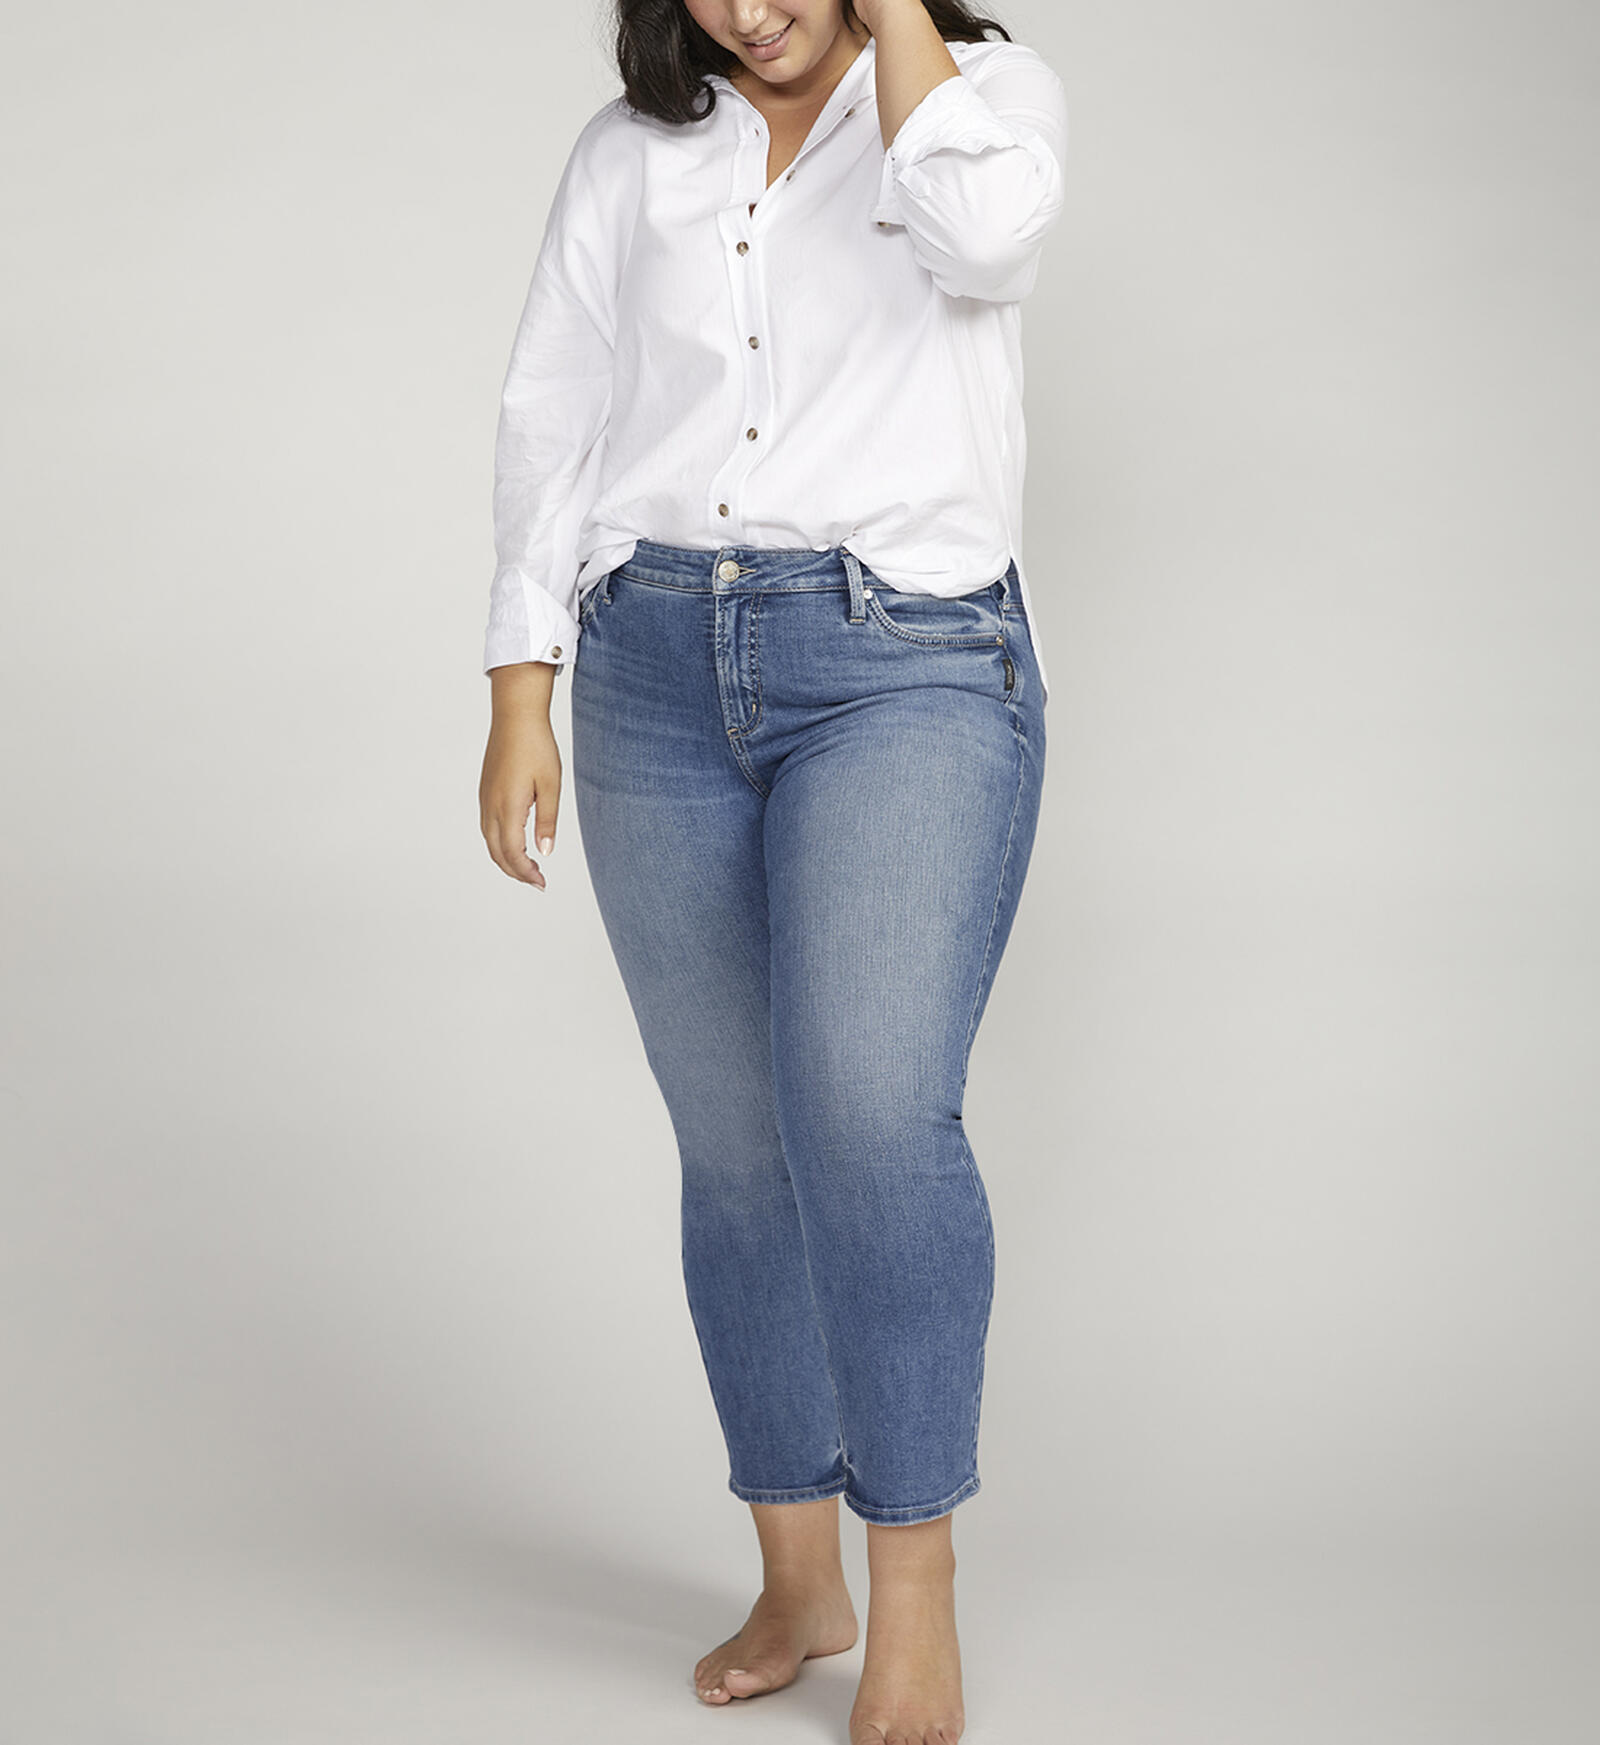 Buy Elyse Mid Rise Straight Leg Crop Jeans Plus Size for CAD 70.00